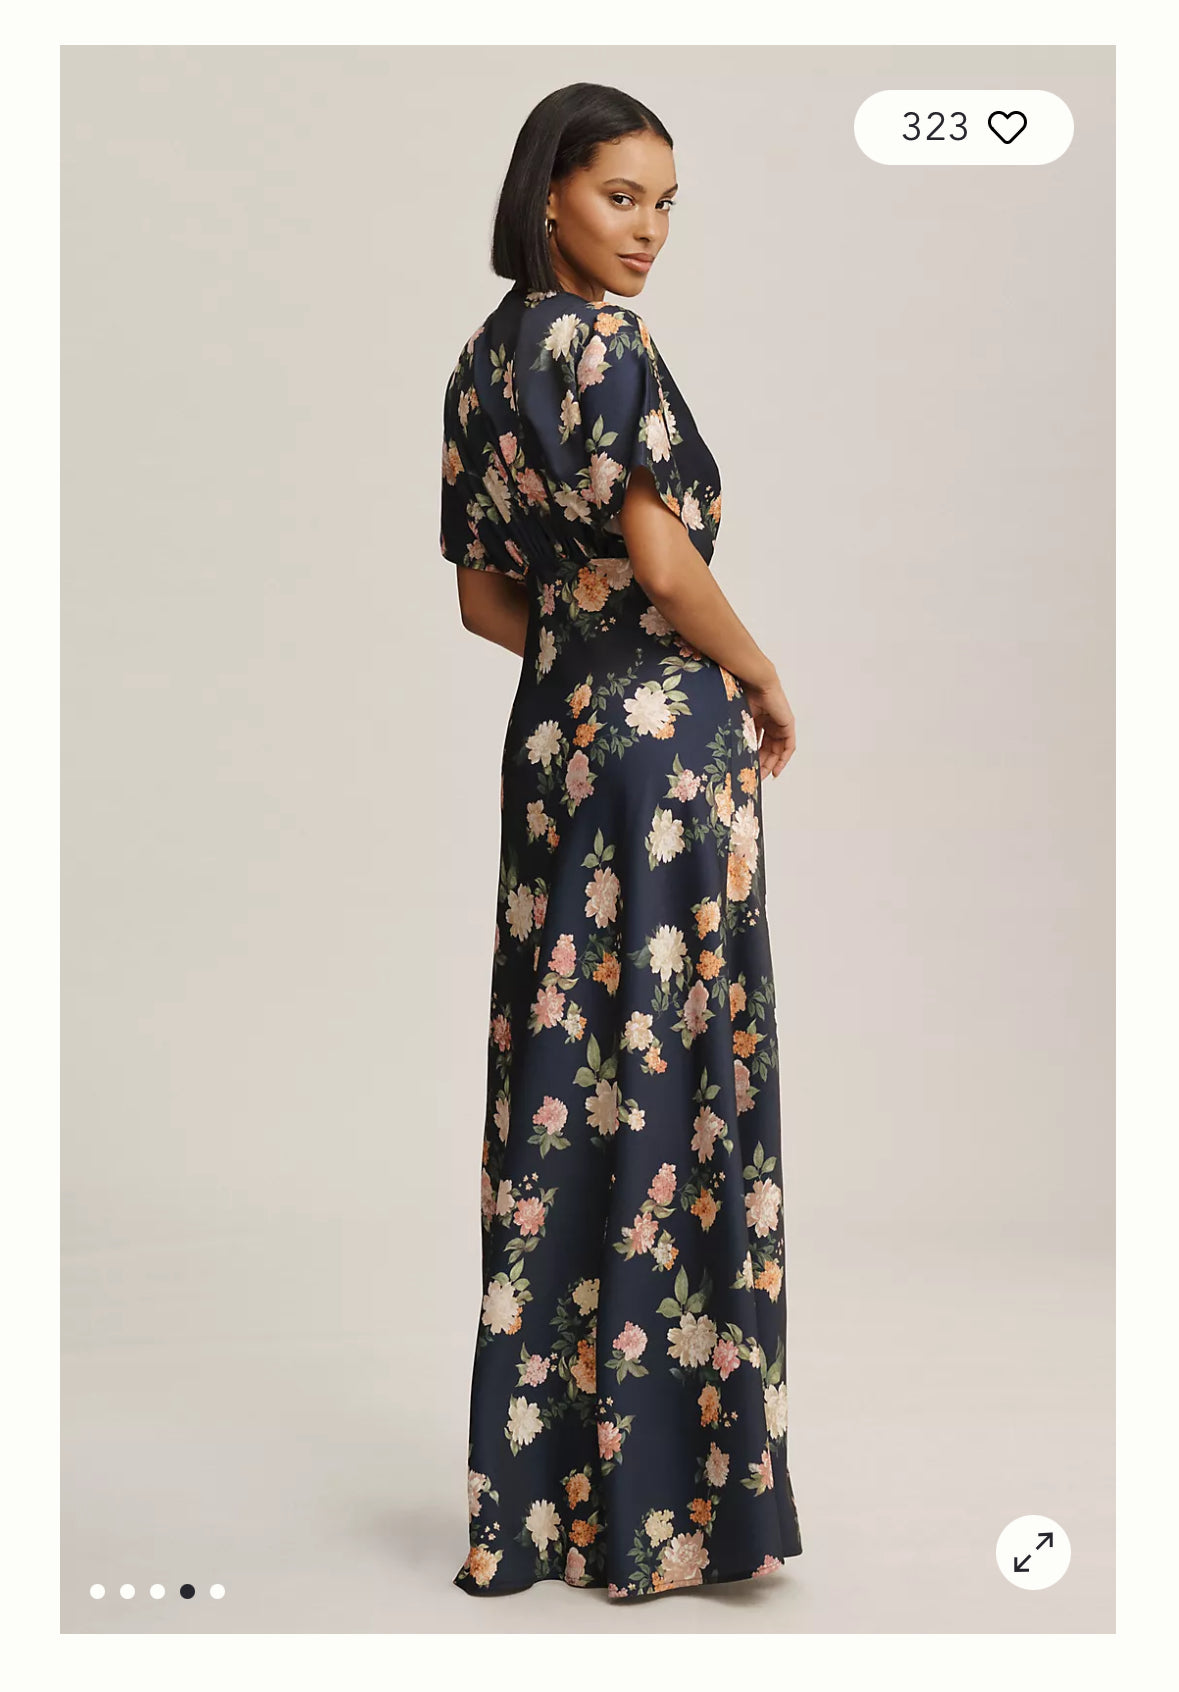 Wospe - Short-Sleeve Floral A-Line Evening Dress / Gown | YesStyle